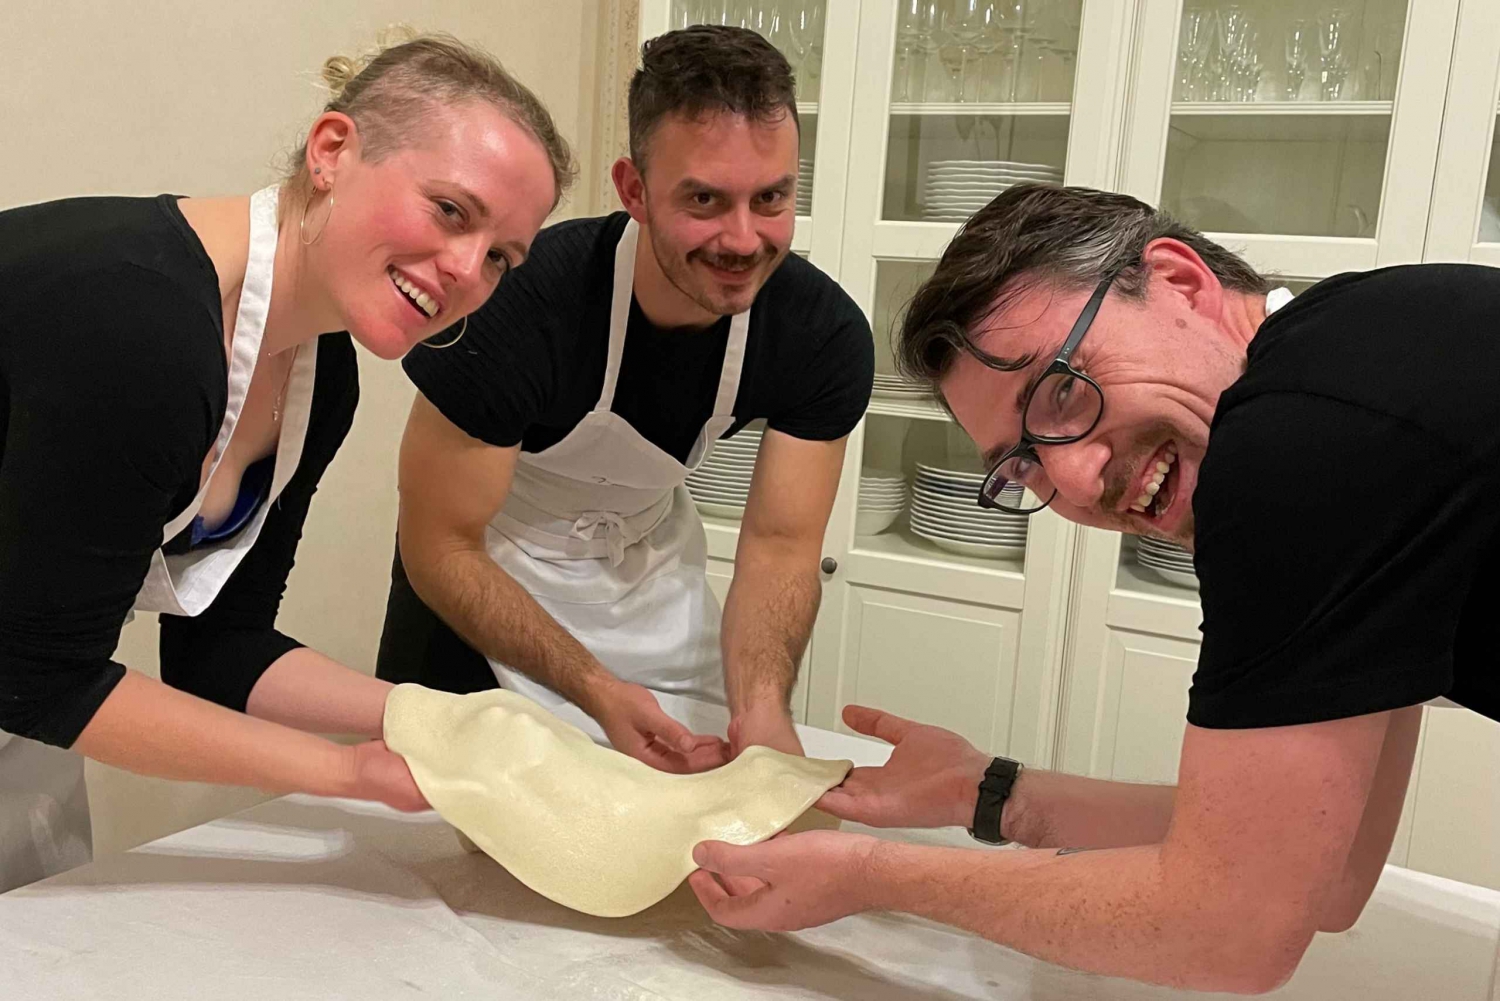 Budapest: 100% Hands-On Strudel Making Class